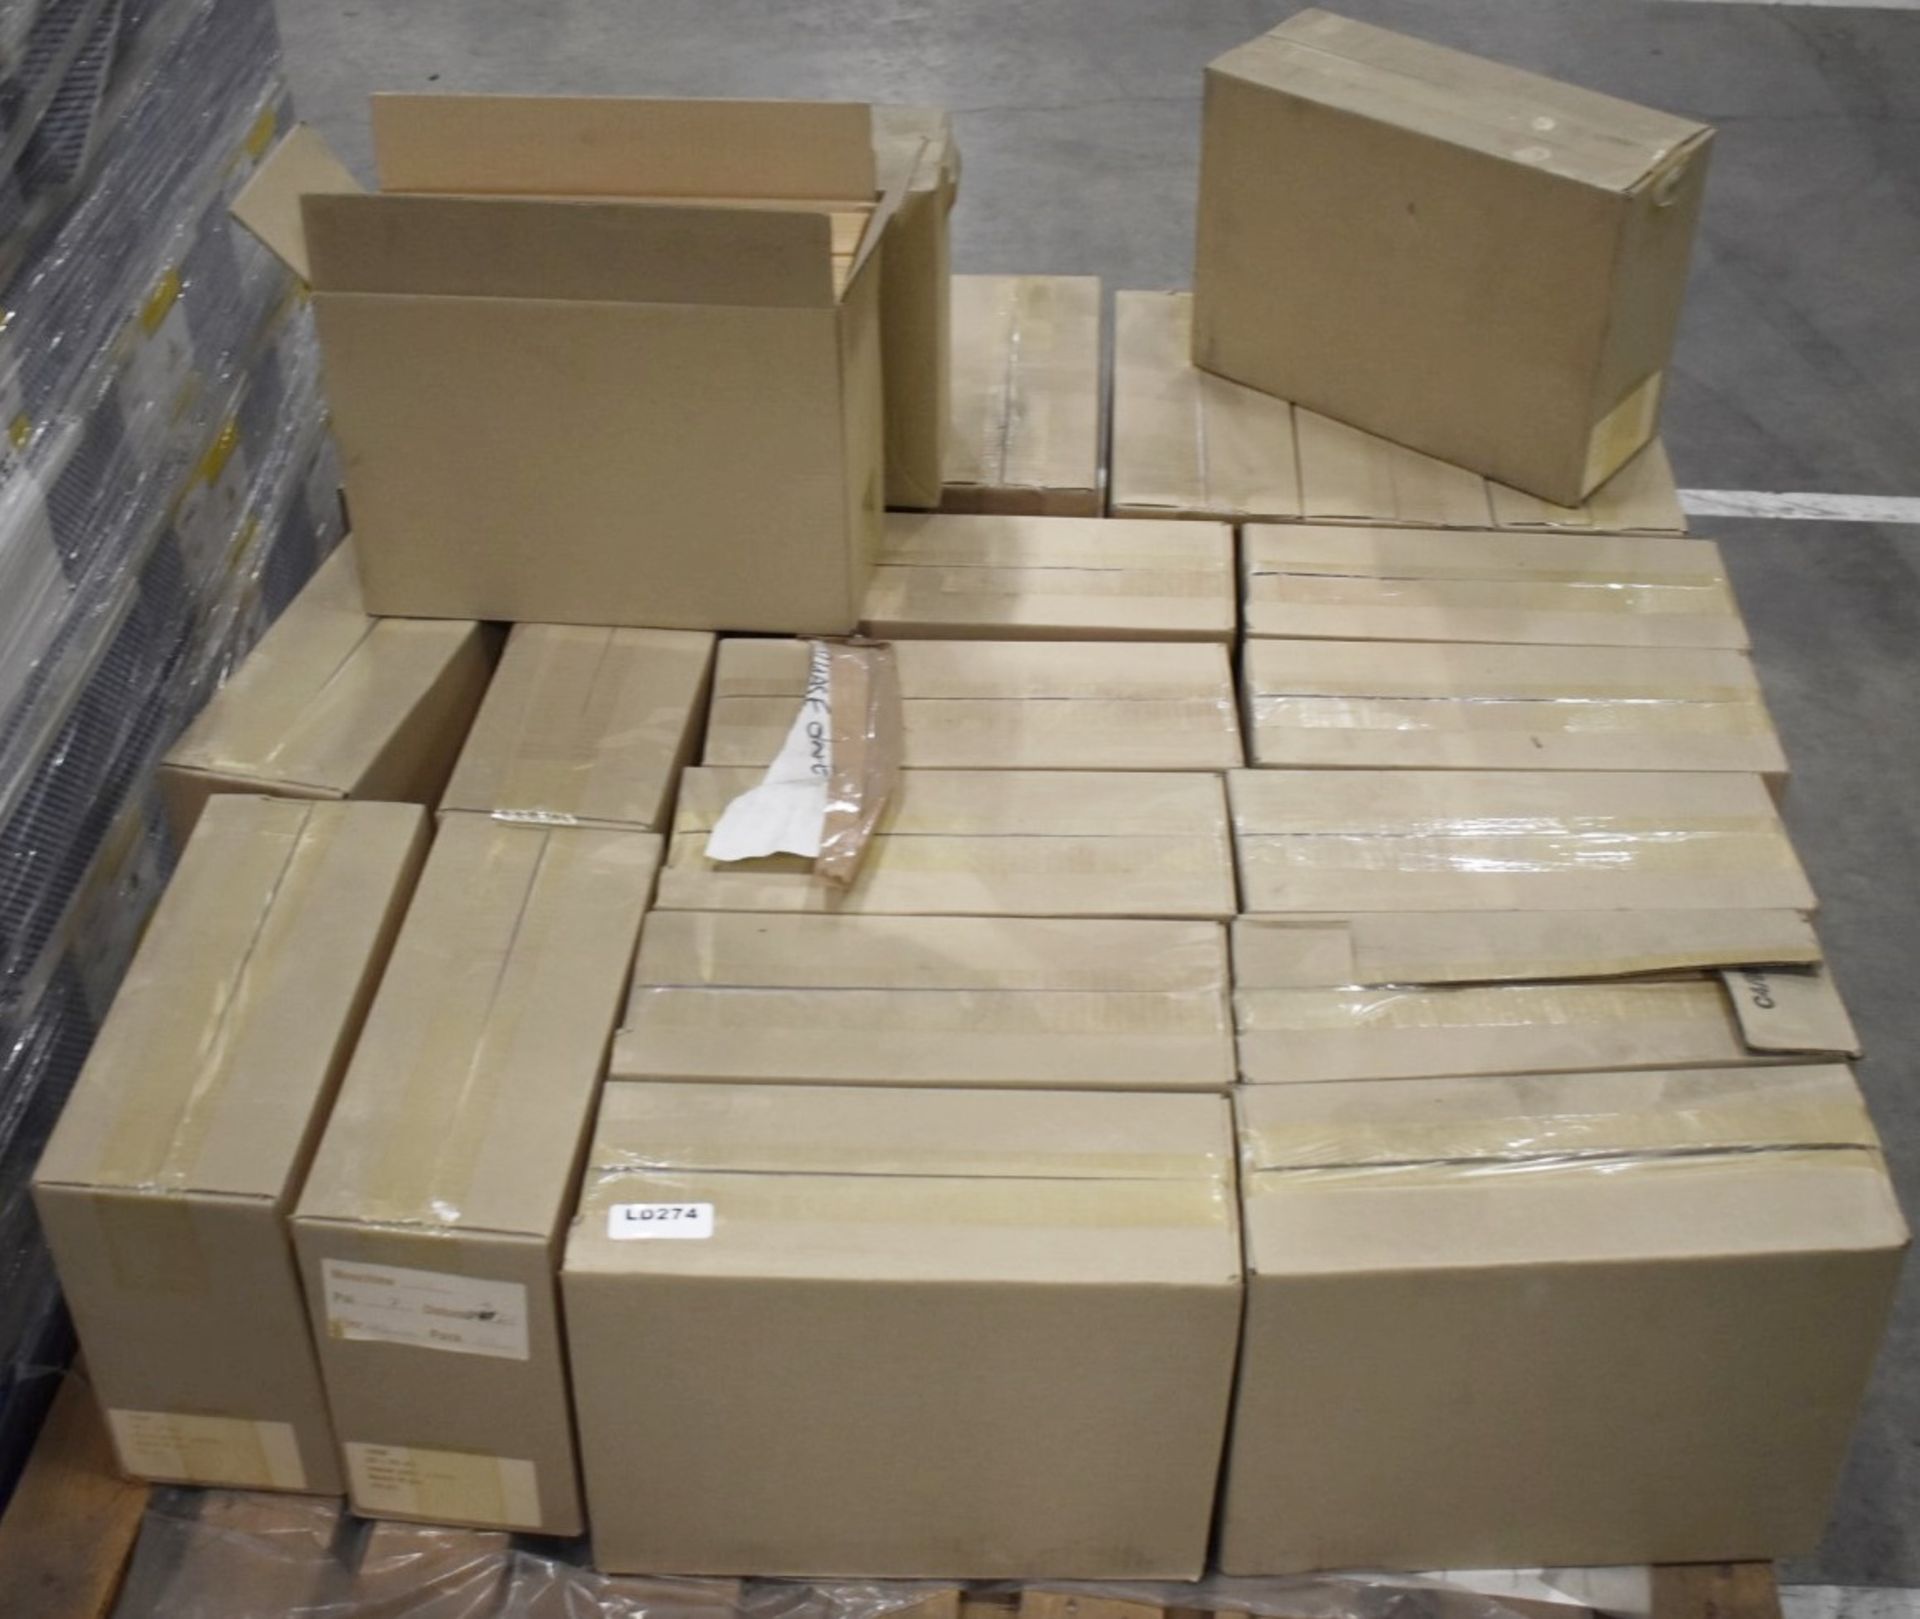 Approx 40 Boxes of Manilla 90gsm Window Envelopes - Ref LD274 - CL480 - Location: Nottingham NG15 - Image 2 of 5